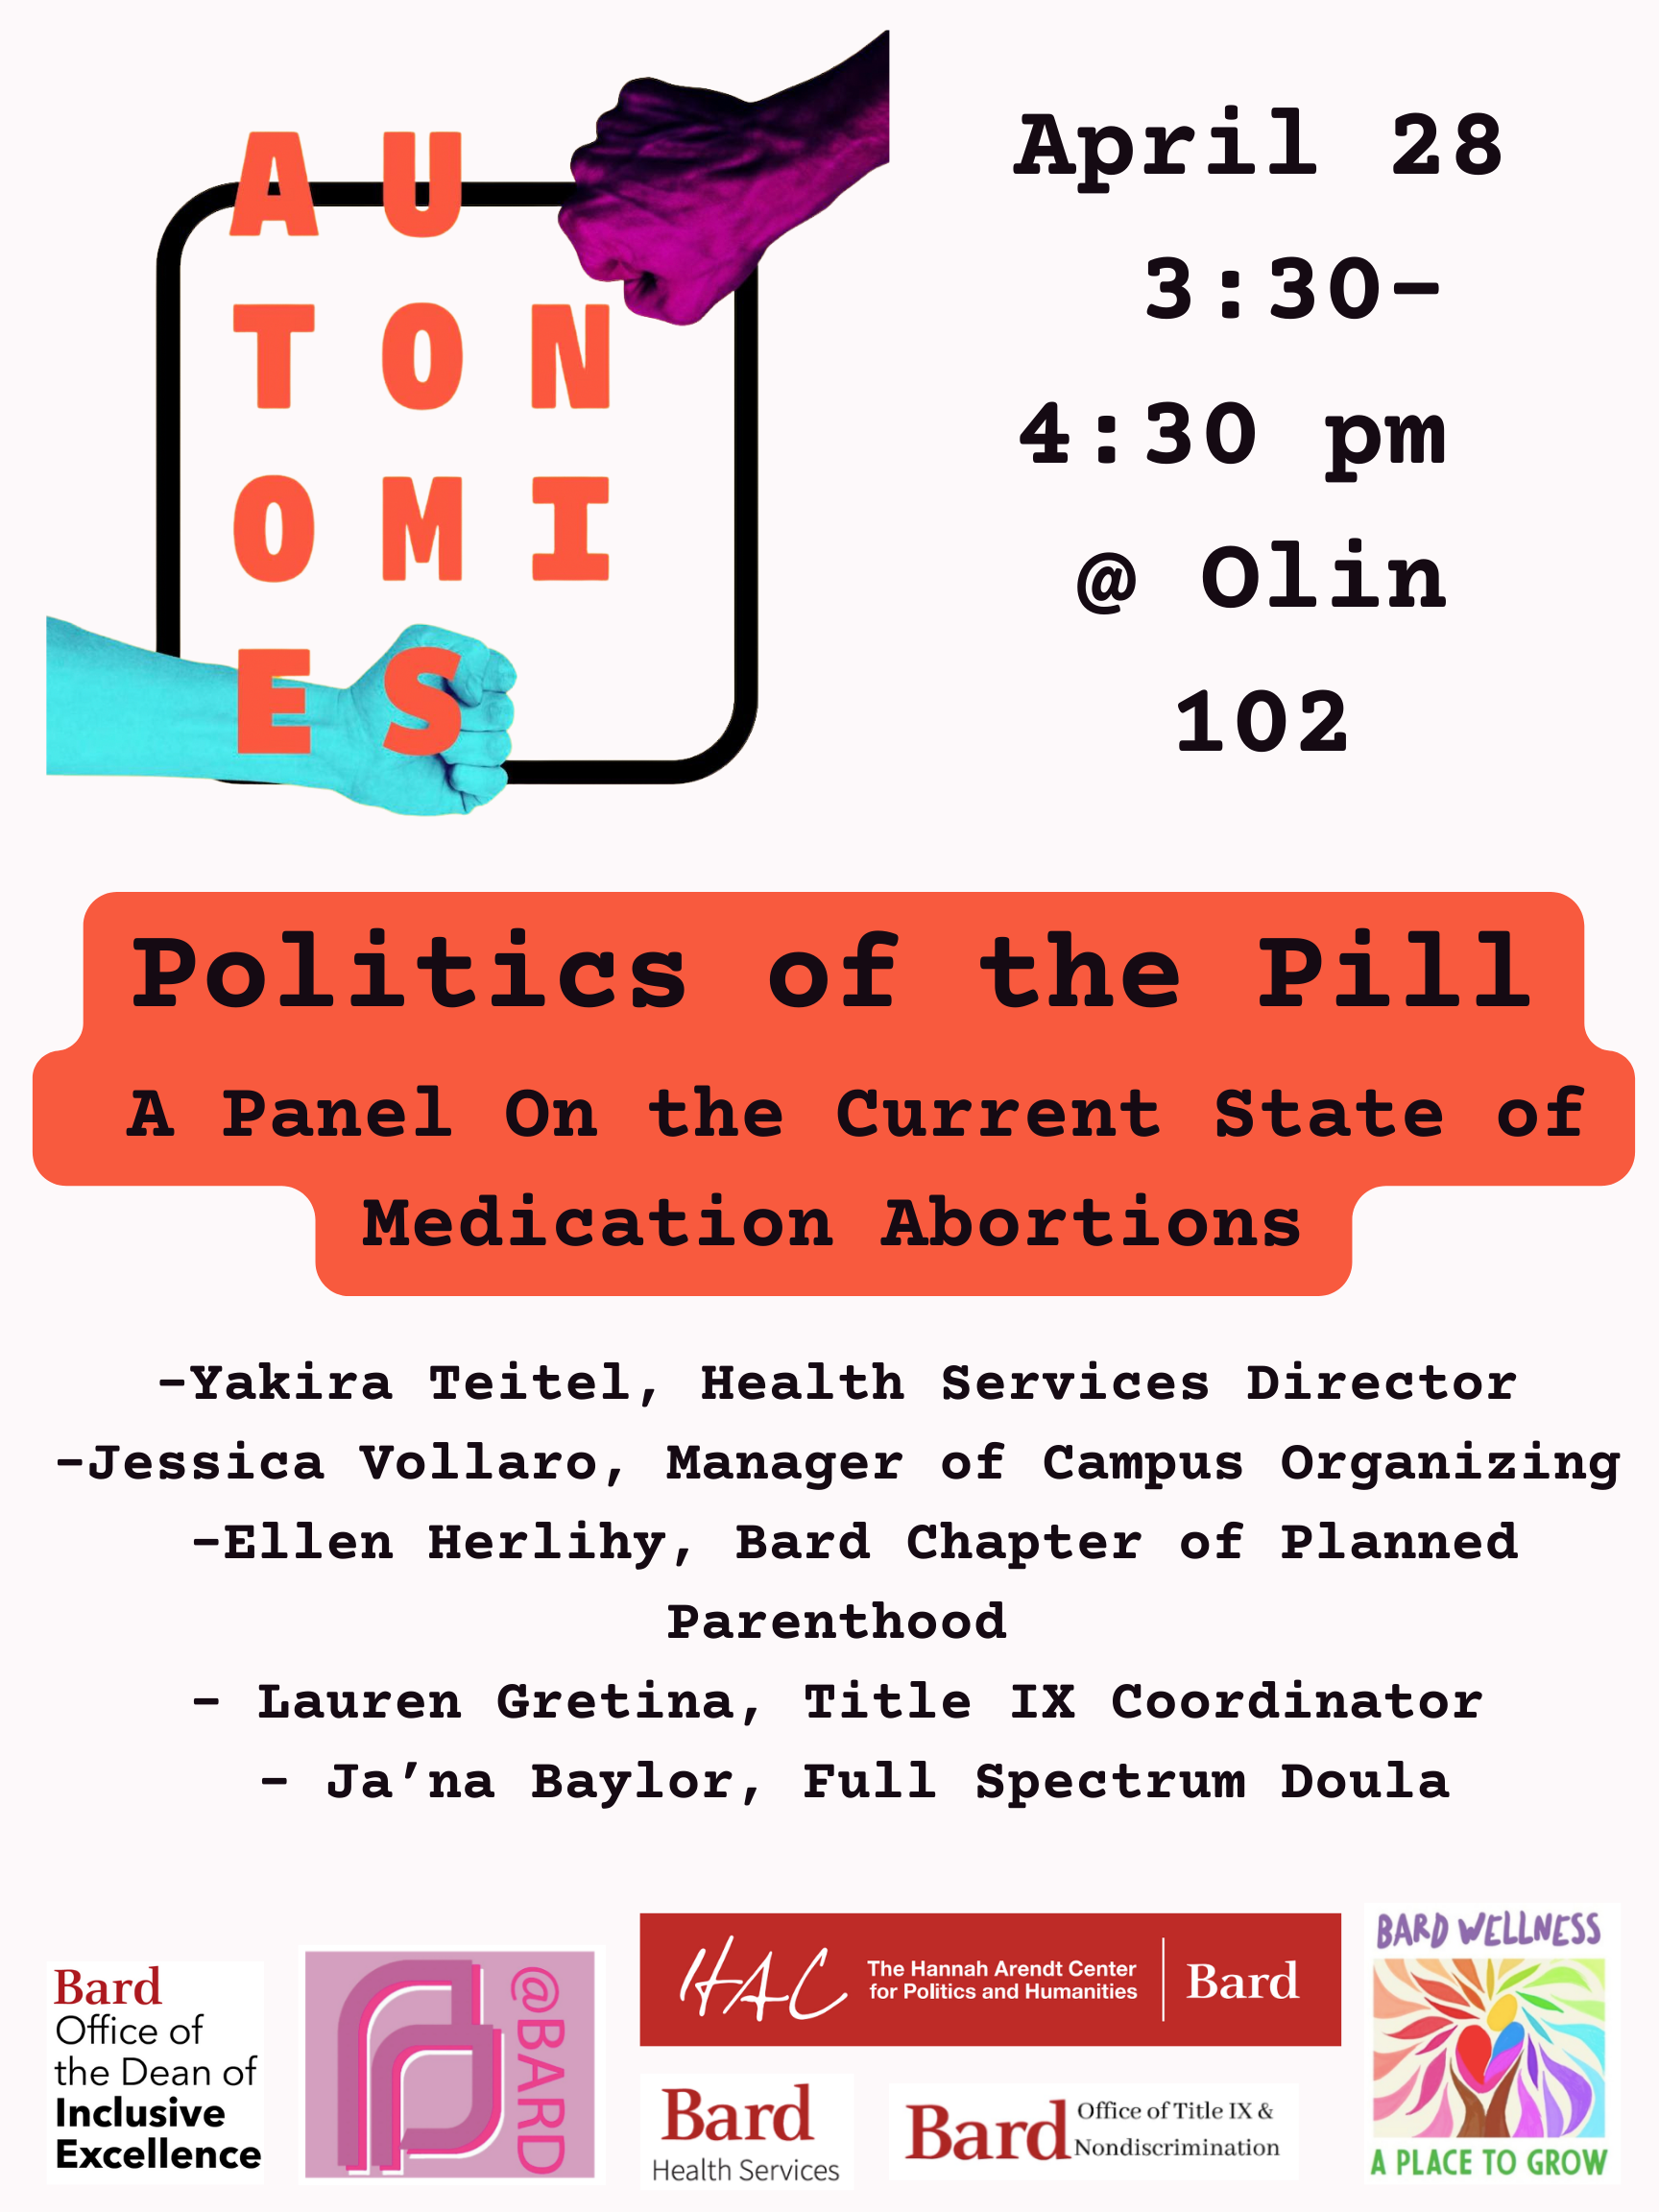 The Politics of the Pill: